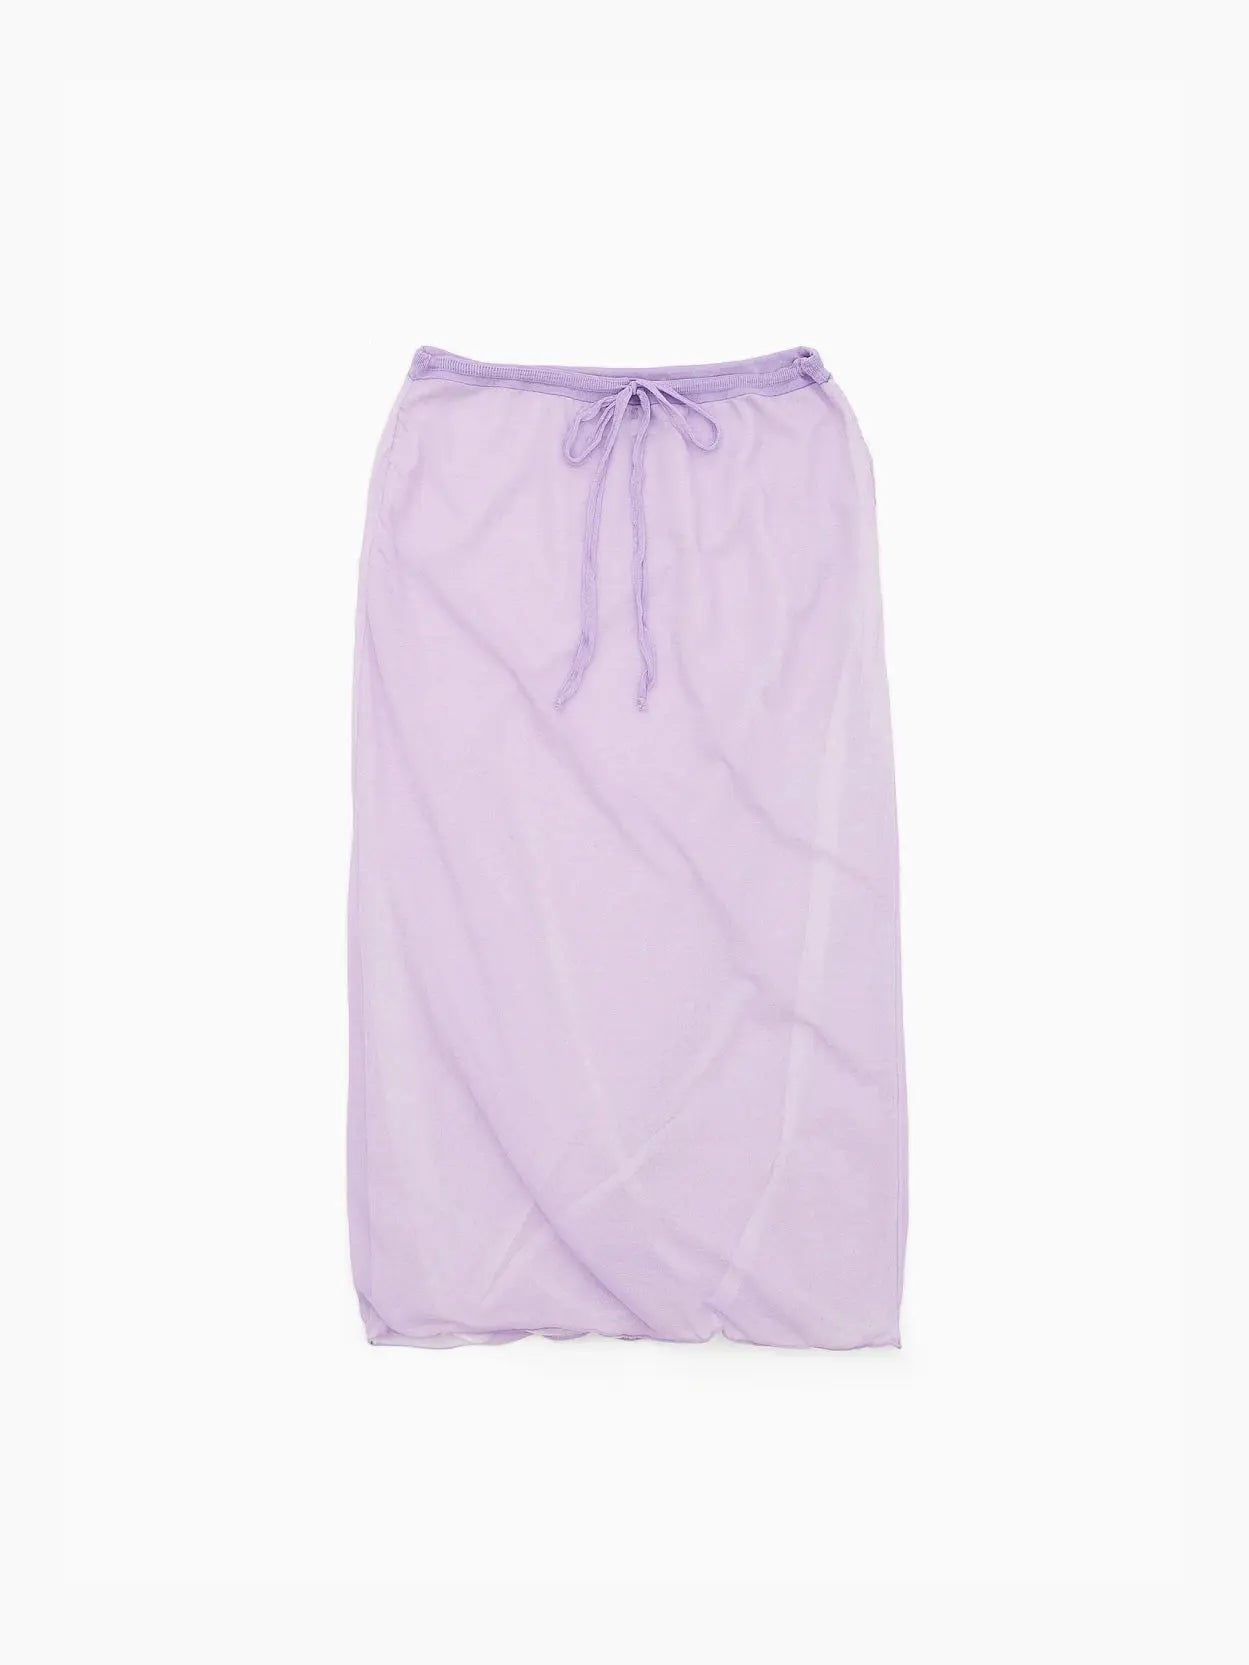 A sheer, light purple skirt with an elastic waistband and adjustable drawstring, perfect for beachwear or layering. The fabric is semi-transparent and lightweight. Displayed flat against a white background, this elegant piece from Rus brings a touch of Barcelona chic to your wardrobe. The Hankachi Skirt Mauve is sure to be a versatile addition to any fashion ensemble.